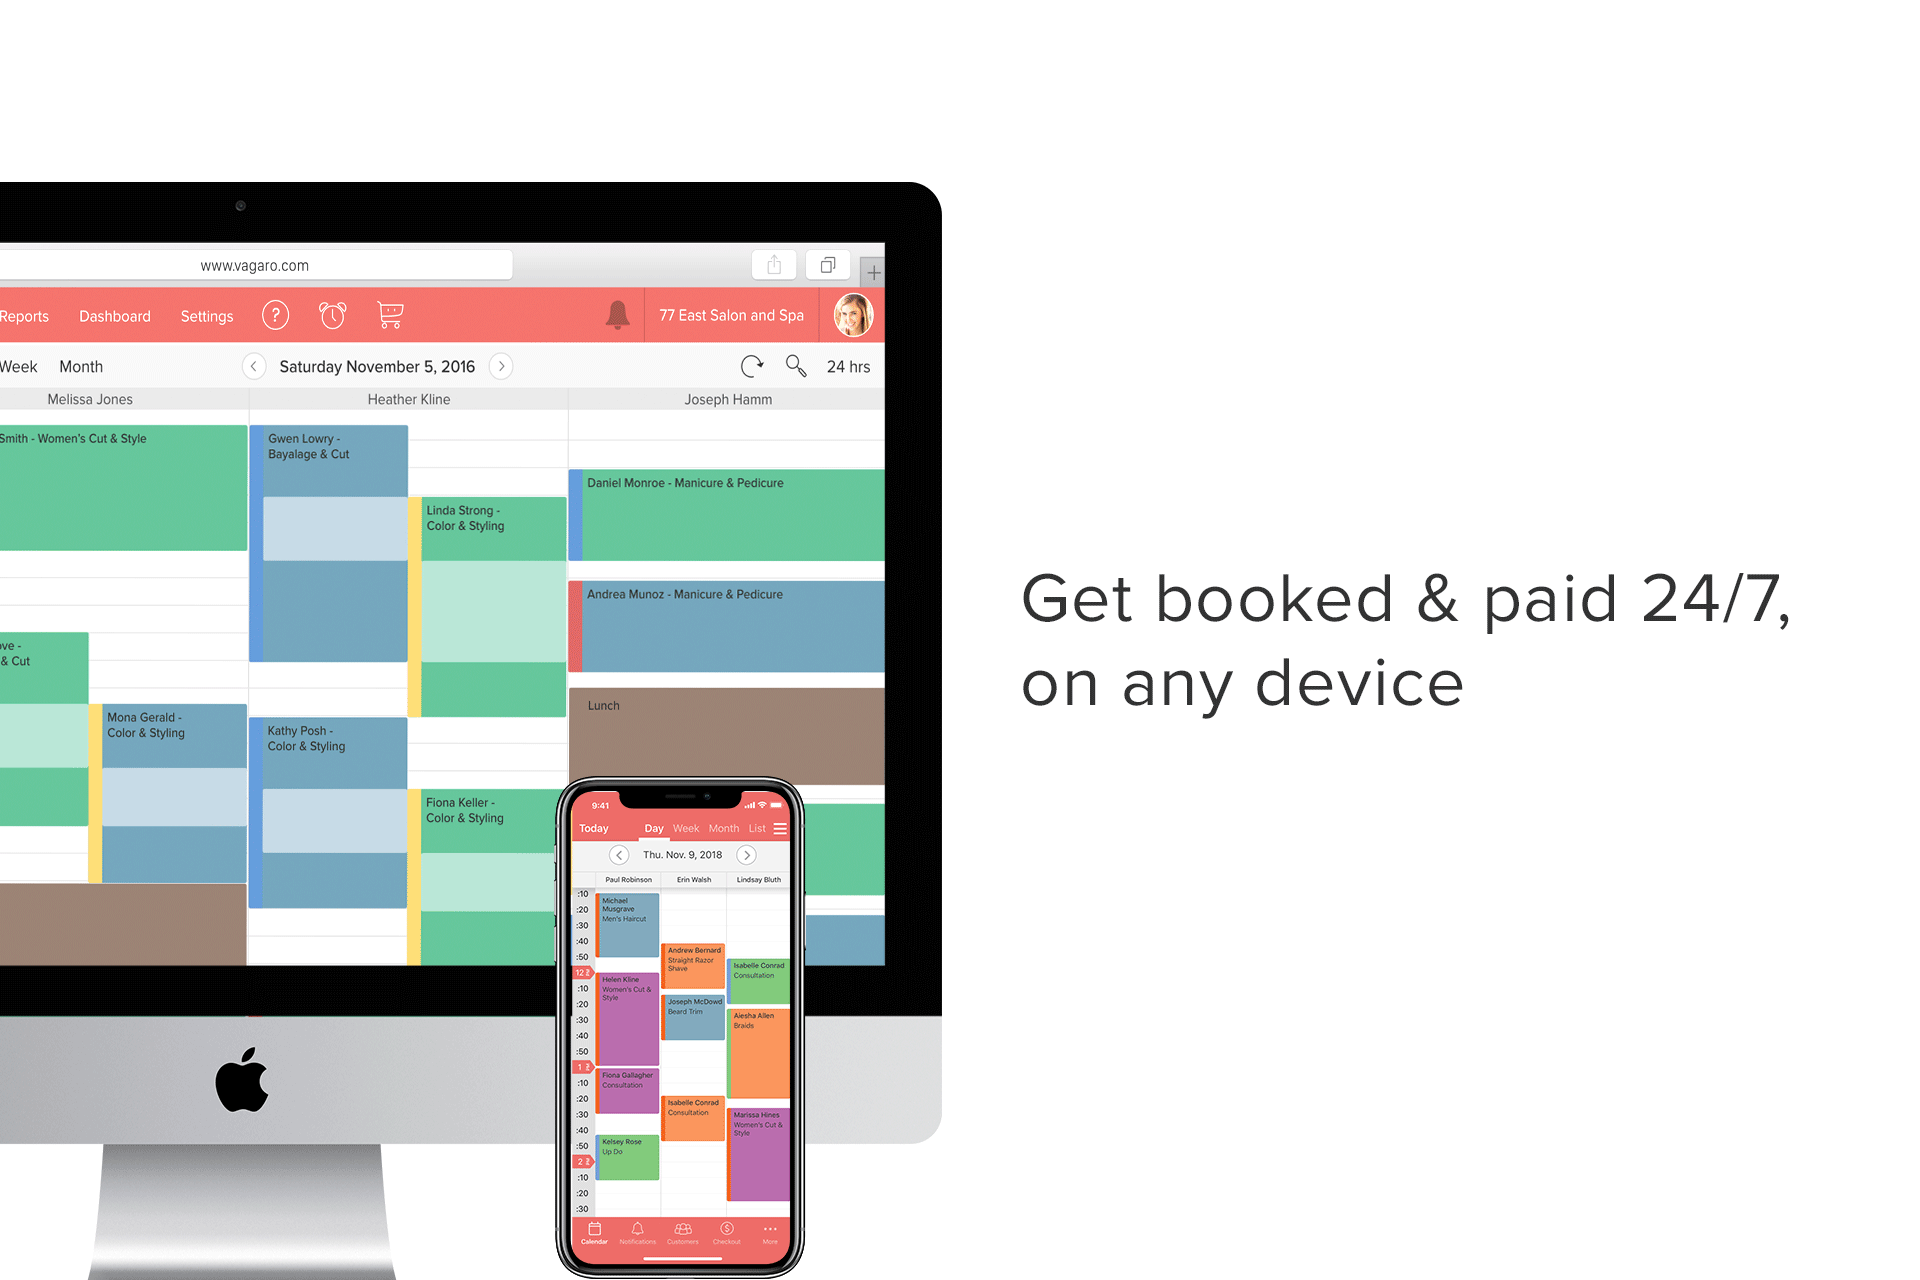 Vagaro Software - Get Booked & Paid 24/7